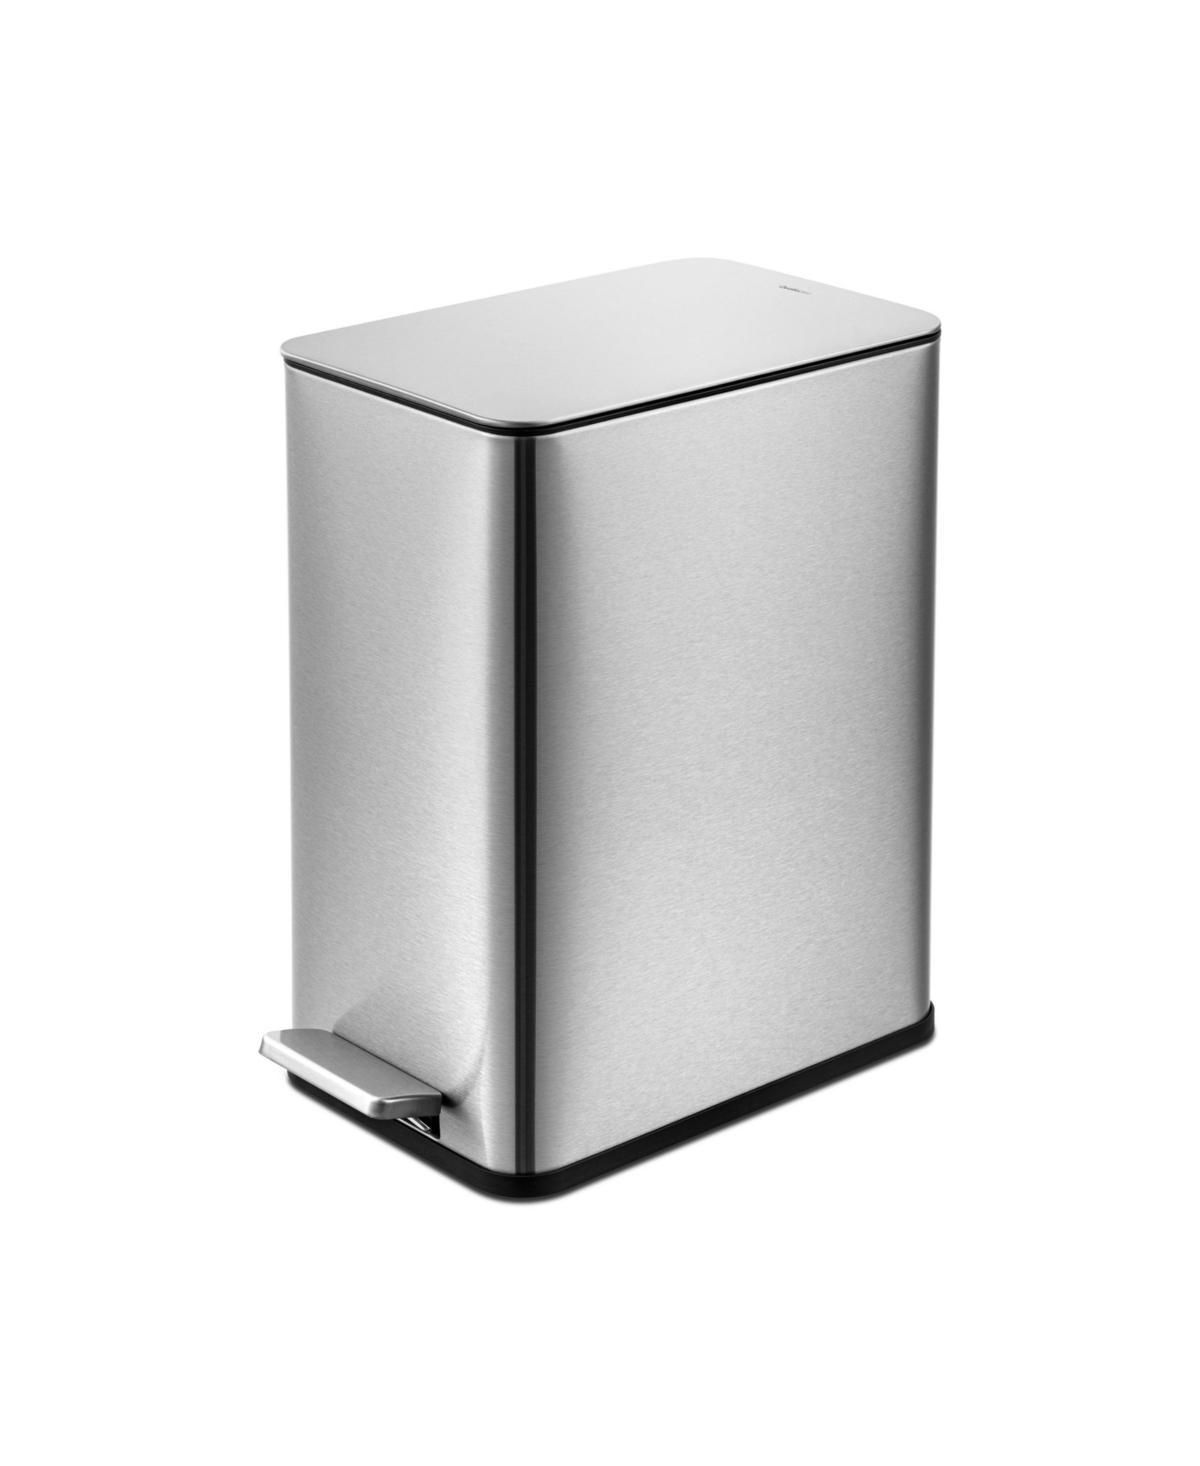 2.6 Gallon Slim Step Can - Stainless Steel